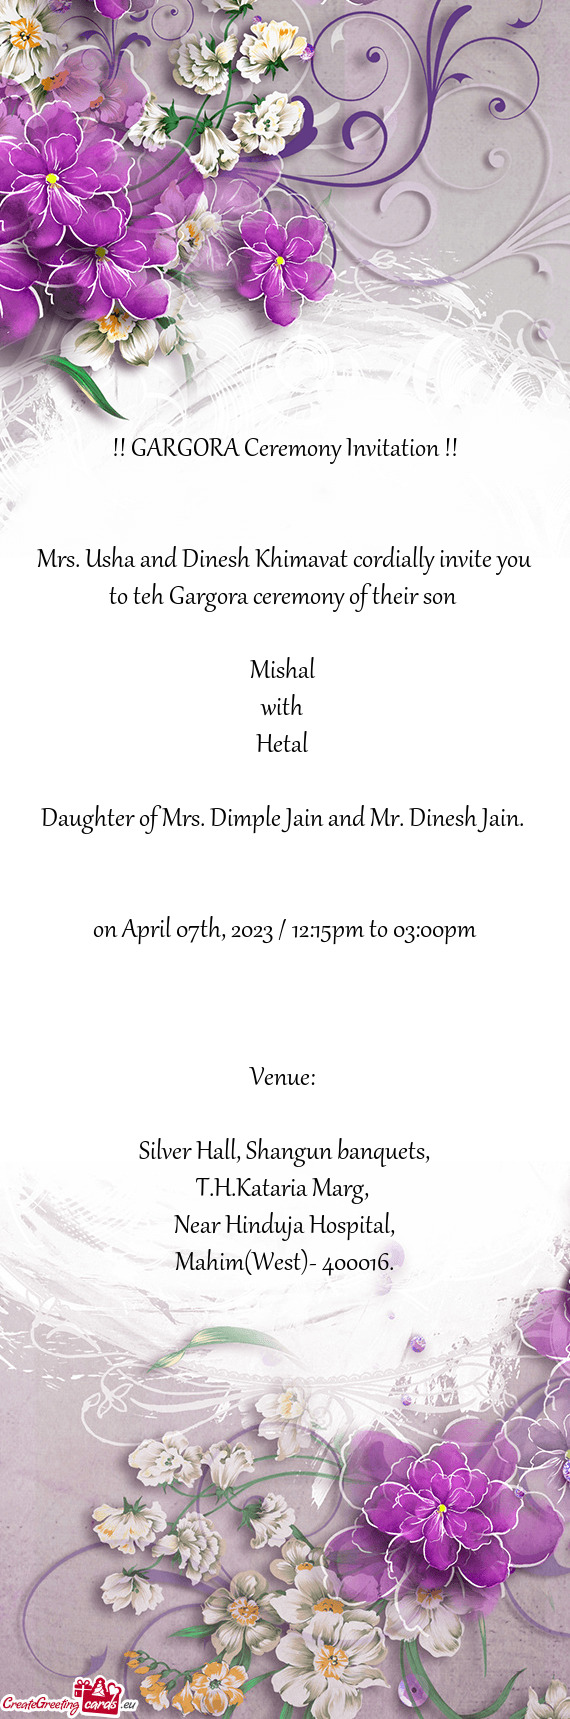 Mrs. Usha and Dinesh Khimavat cordially invite you to teh Gargora ceremony of their son